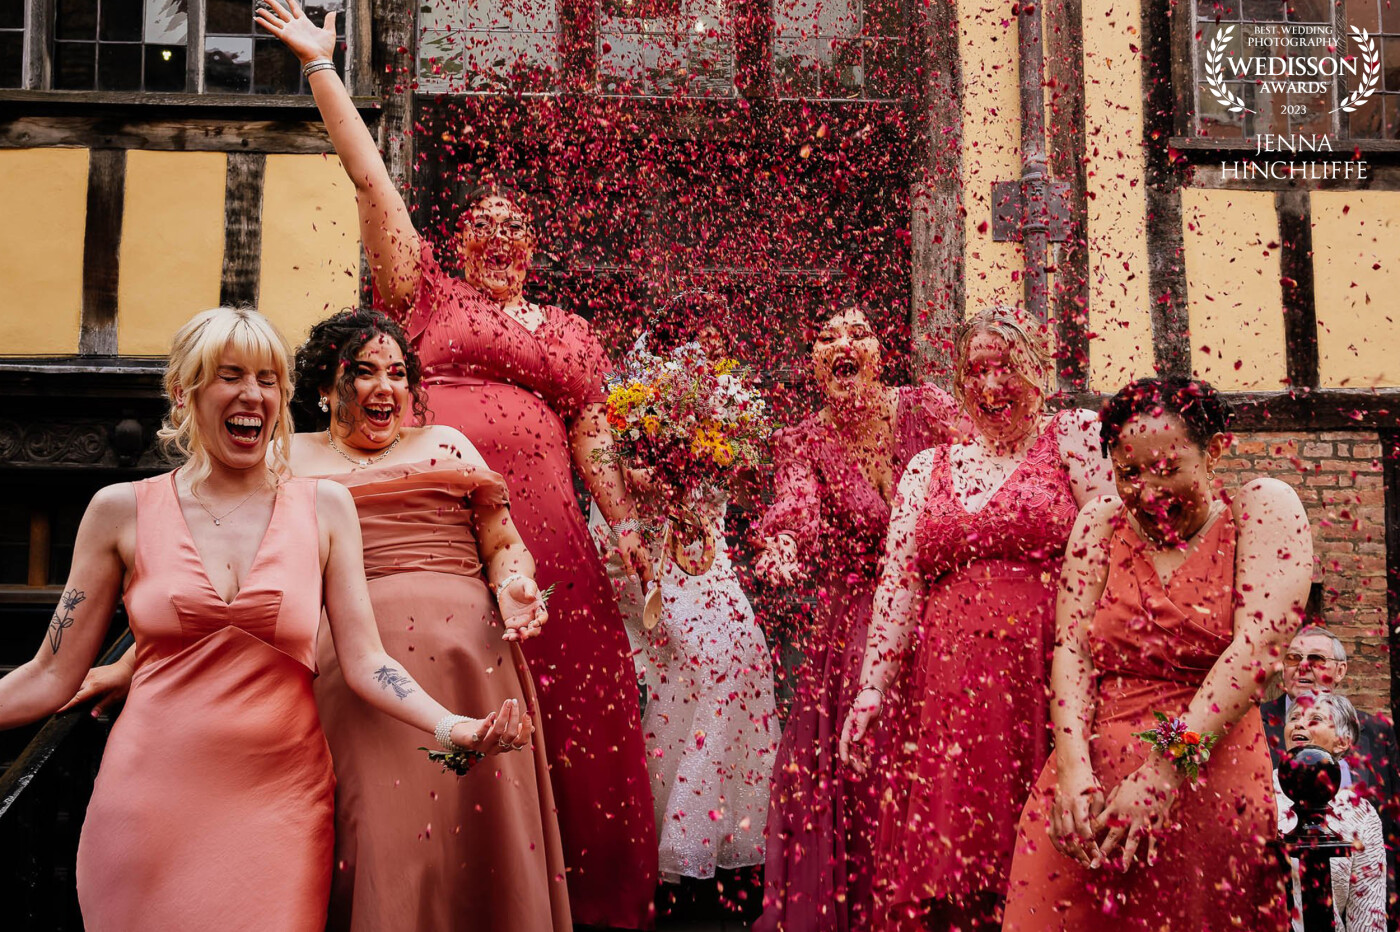 There was so much confetti left over after their initial throw that they decided to do another just with the bridal party and it was such a great moment to capture!